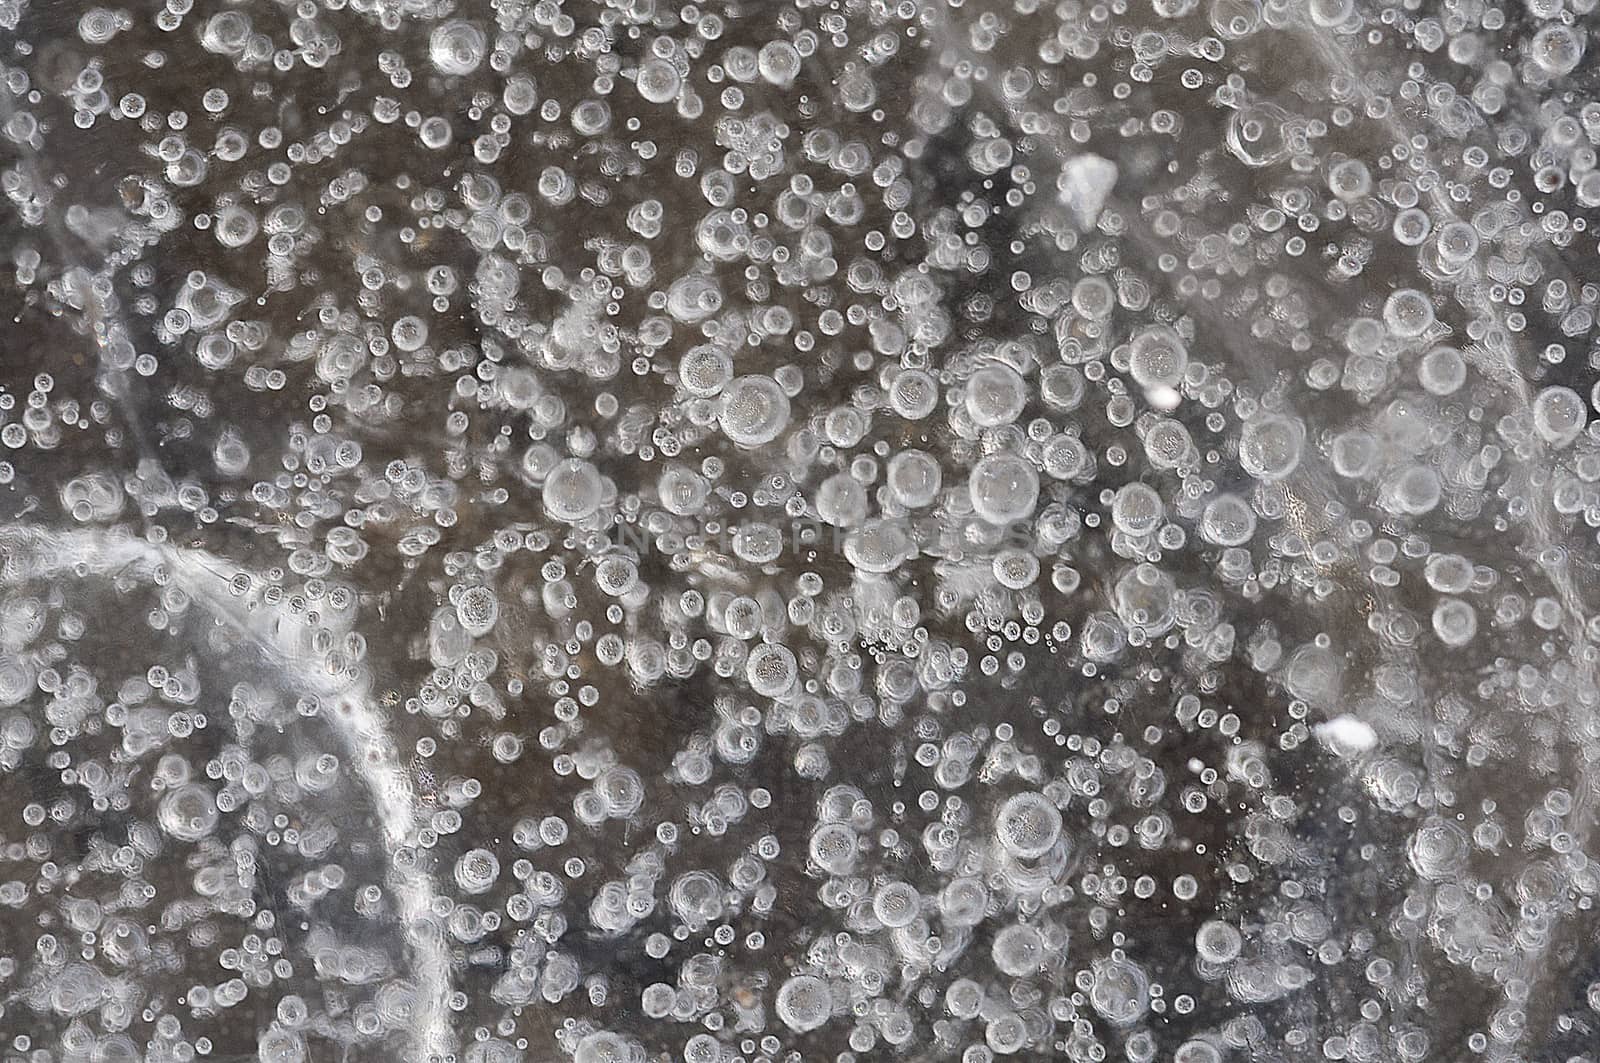 Air bubbles captured in ice. Ice Texture